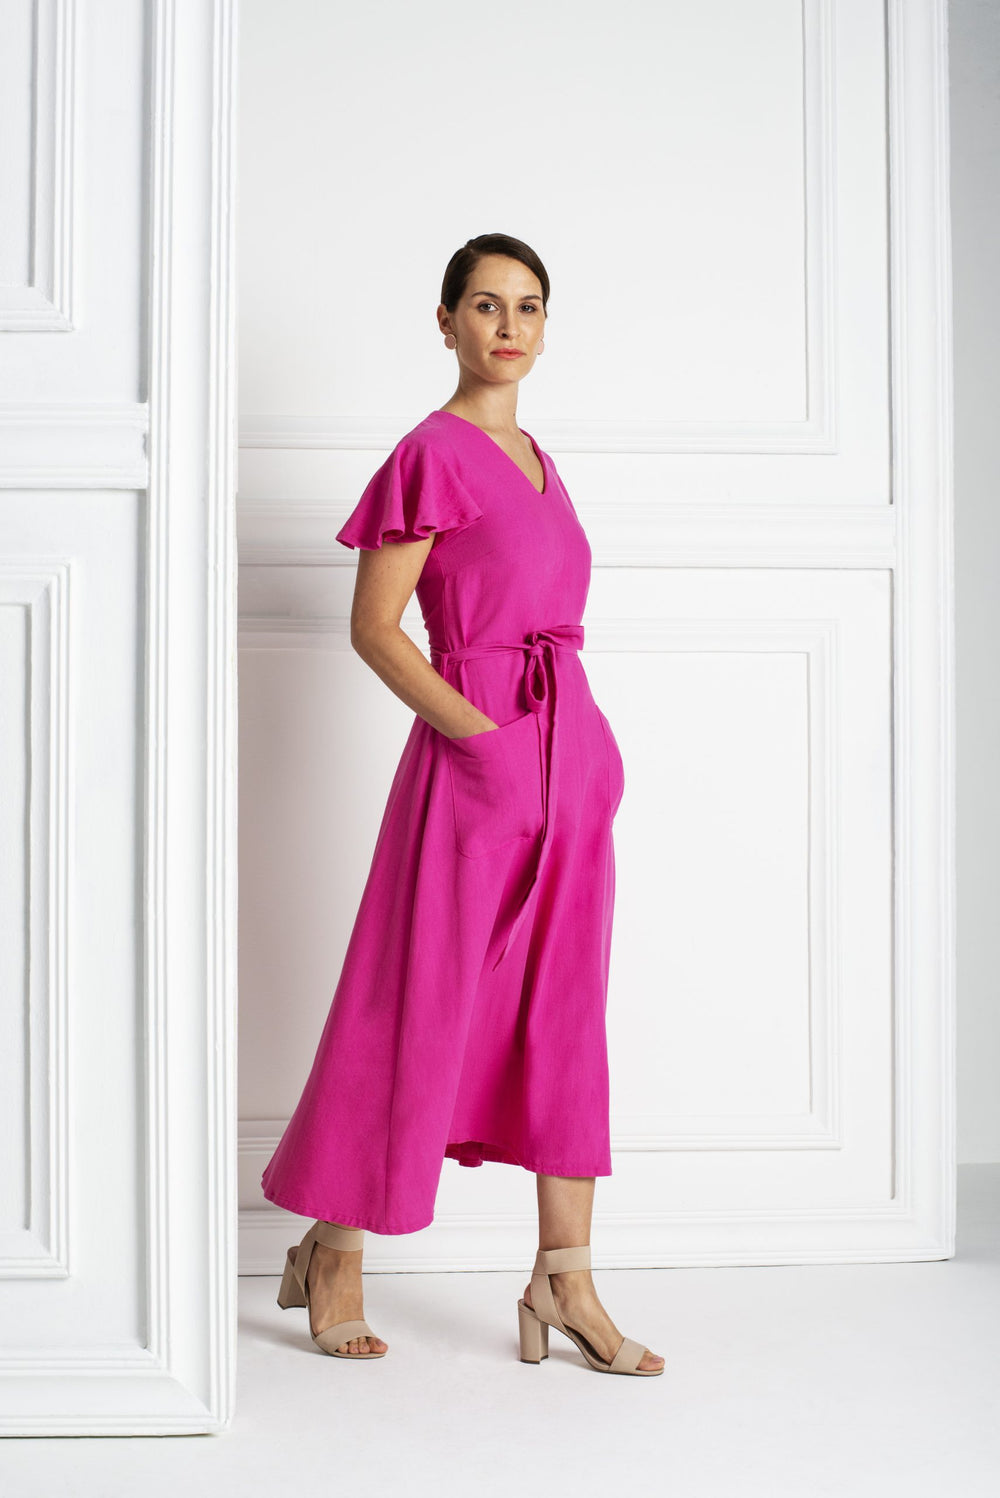 Woman wearing the Margot Dress sewing pattern from Pattern Sewciety on The Fold Line. A dress pattern made in cotton, cotton blends, linen, linen blends, rayon’s or satin fabrics, featuring a relaxed fit, V-neck, bust darts, waist seam, short circle sleev